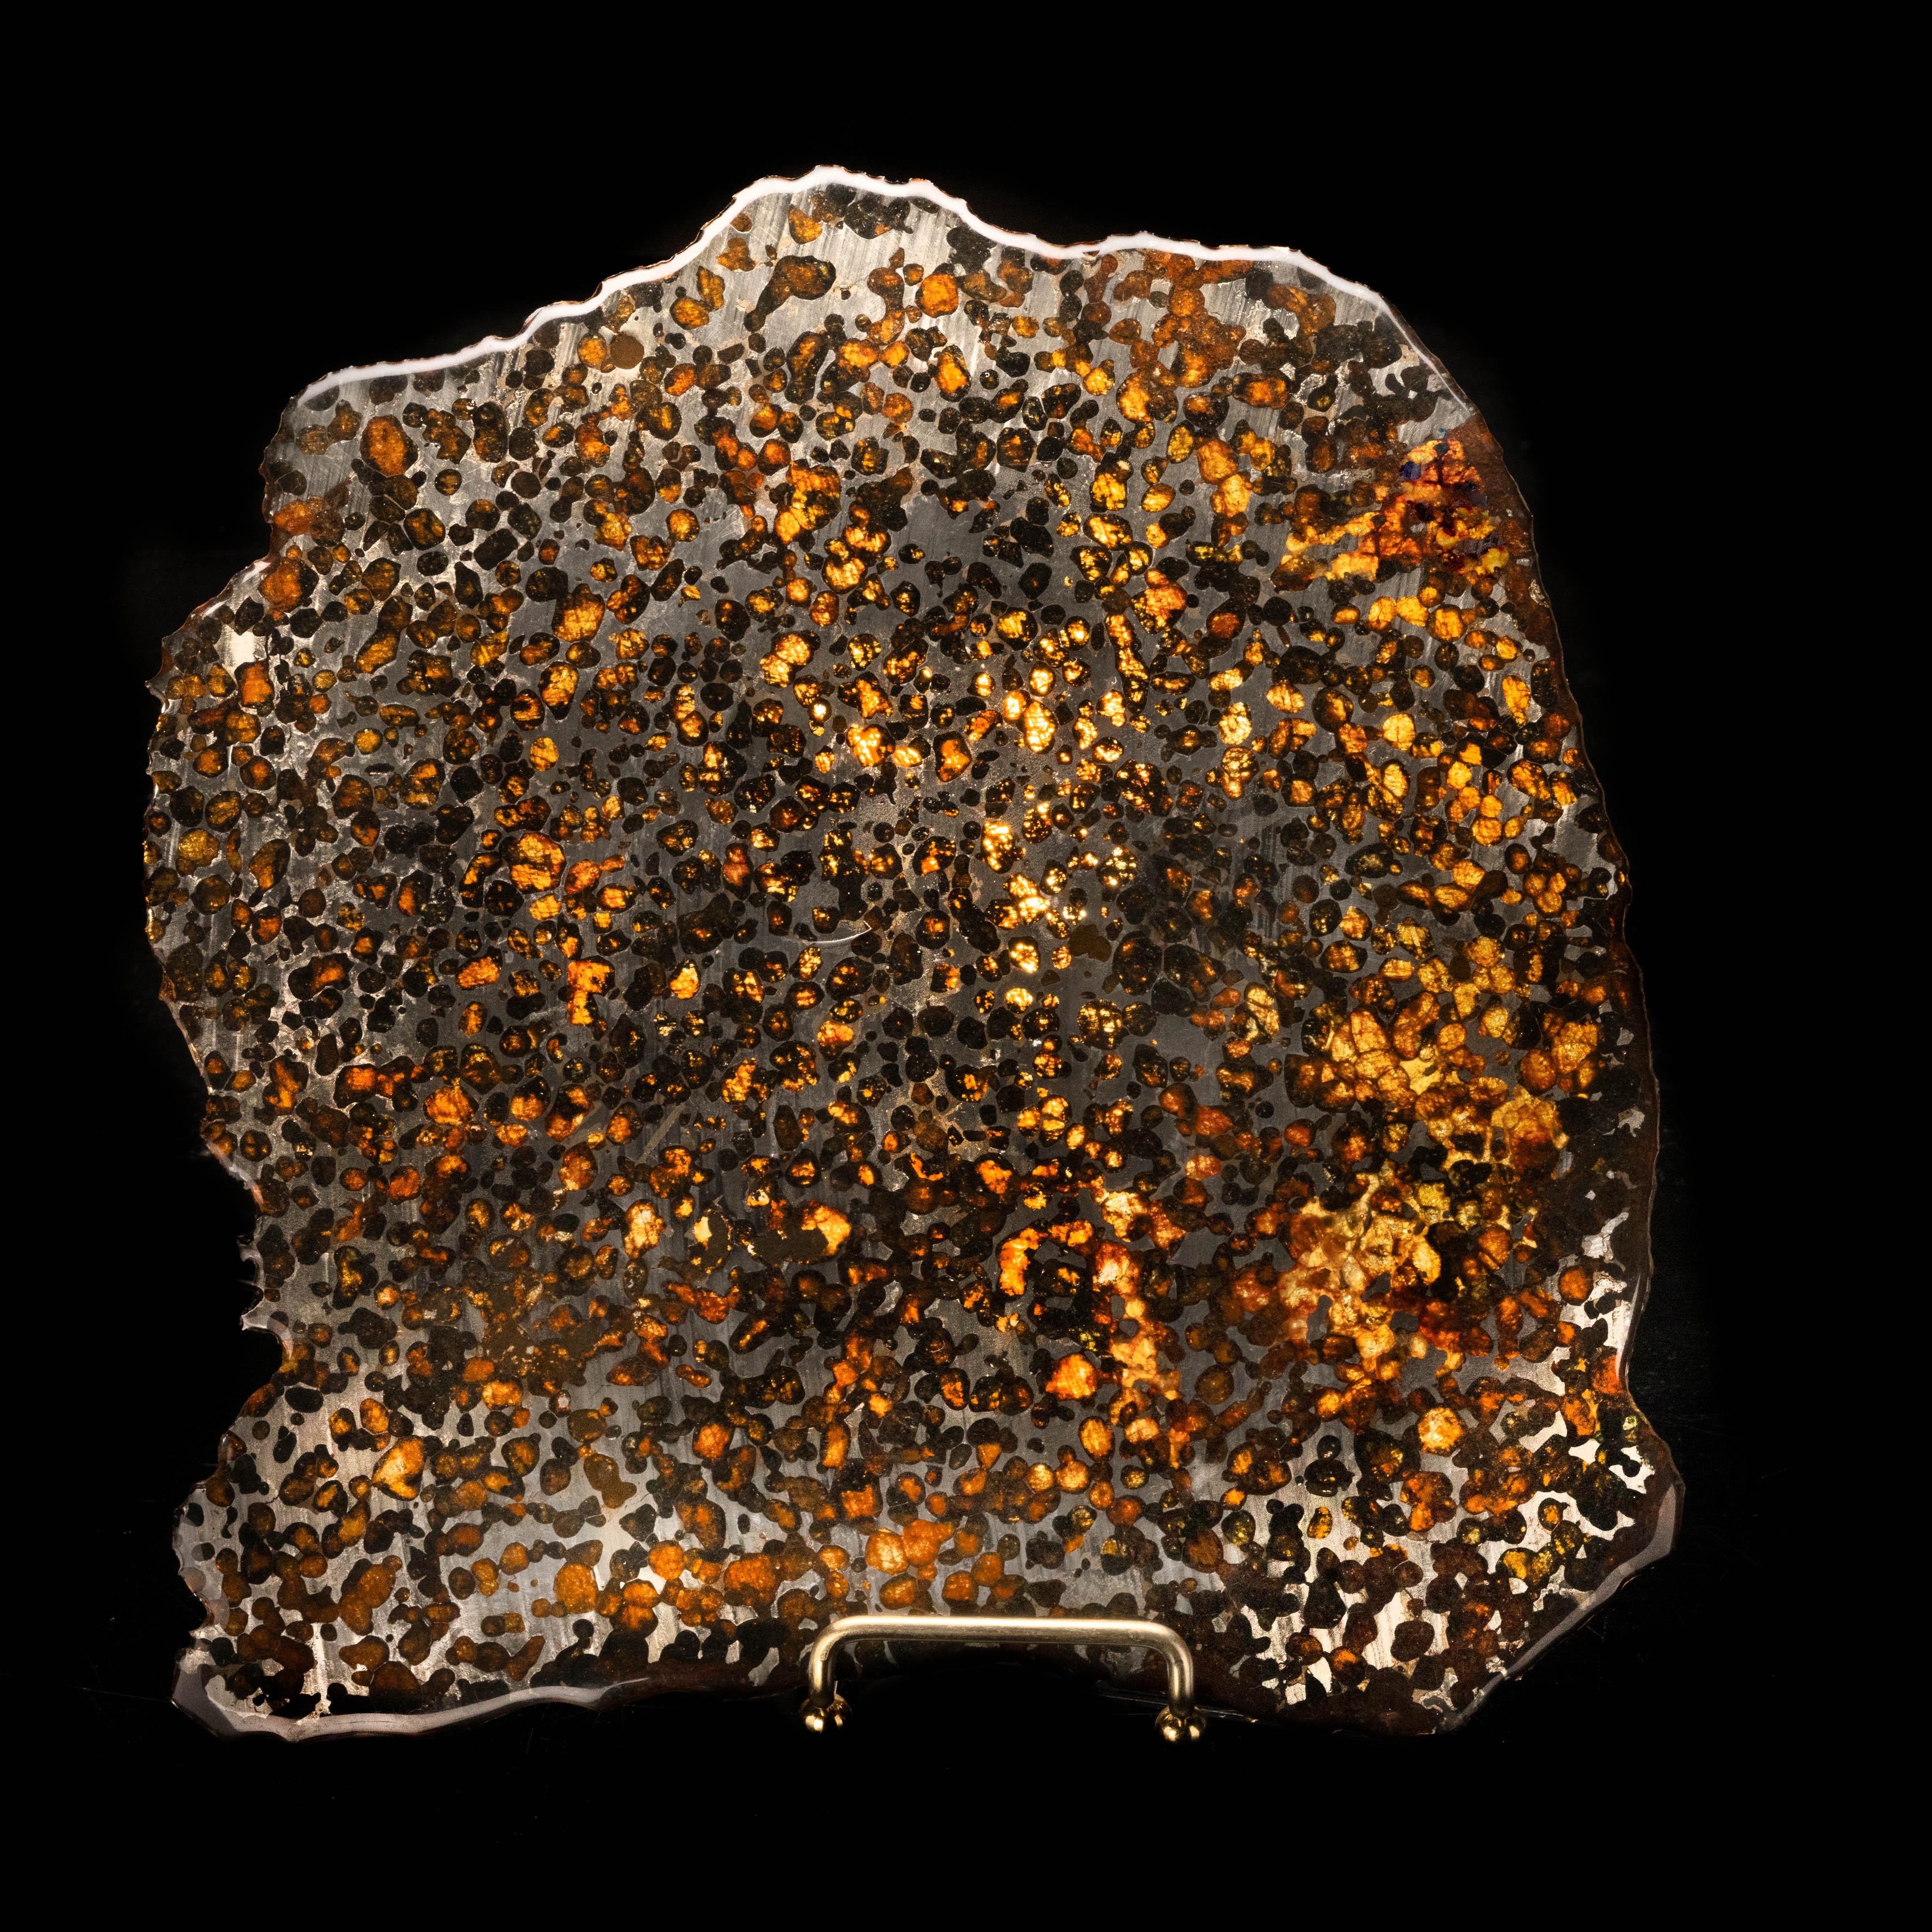 This luminous 536 gram Sericho pallasite meteorite slice dates back approximately 4.5 billion years and was discovered in Kenya. The stony-iron meteorites were first identified as such in 2016; the shower is thought to have occurred decades ago,